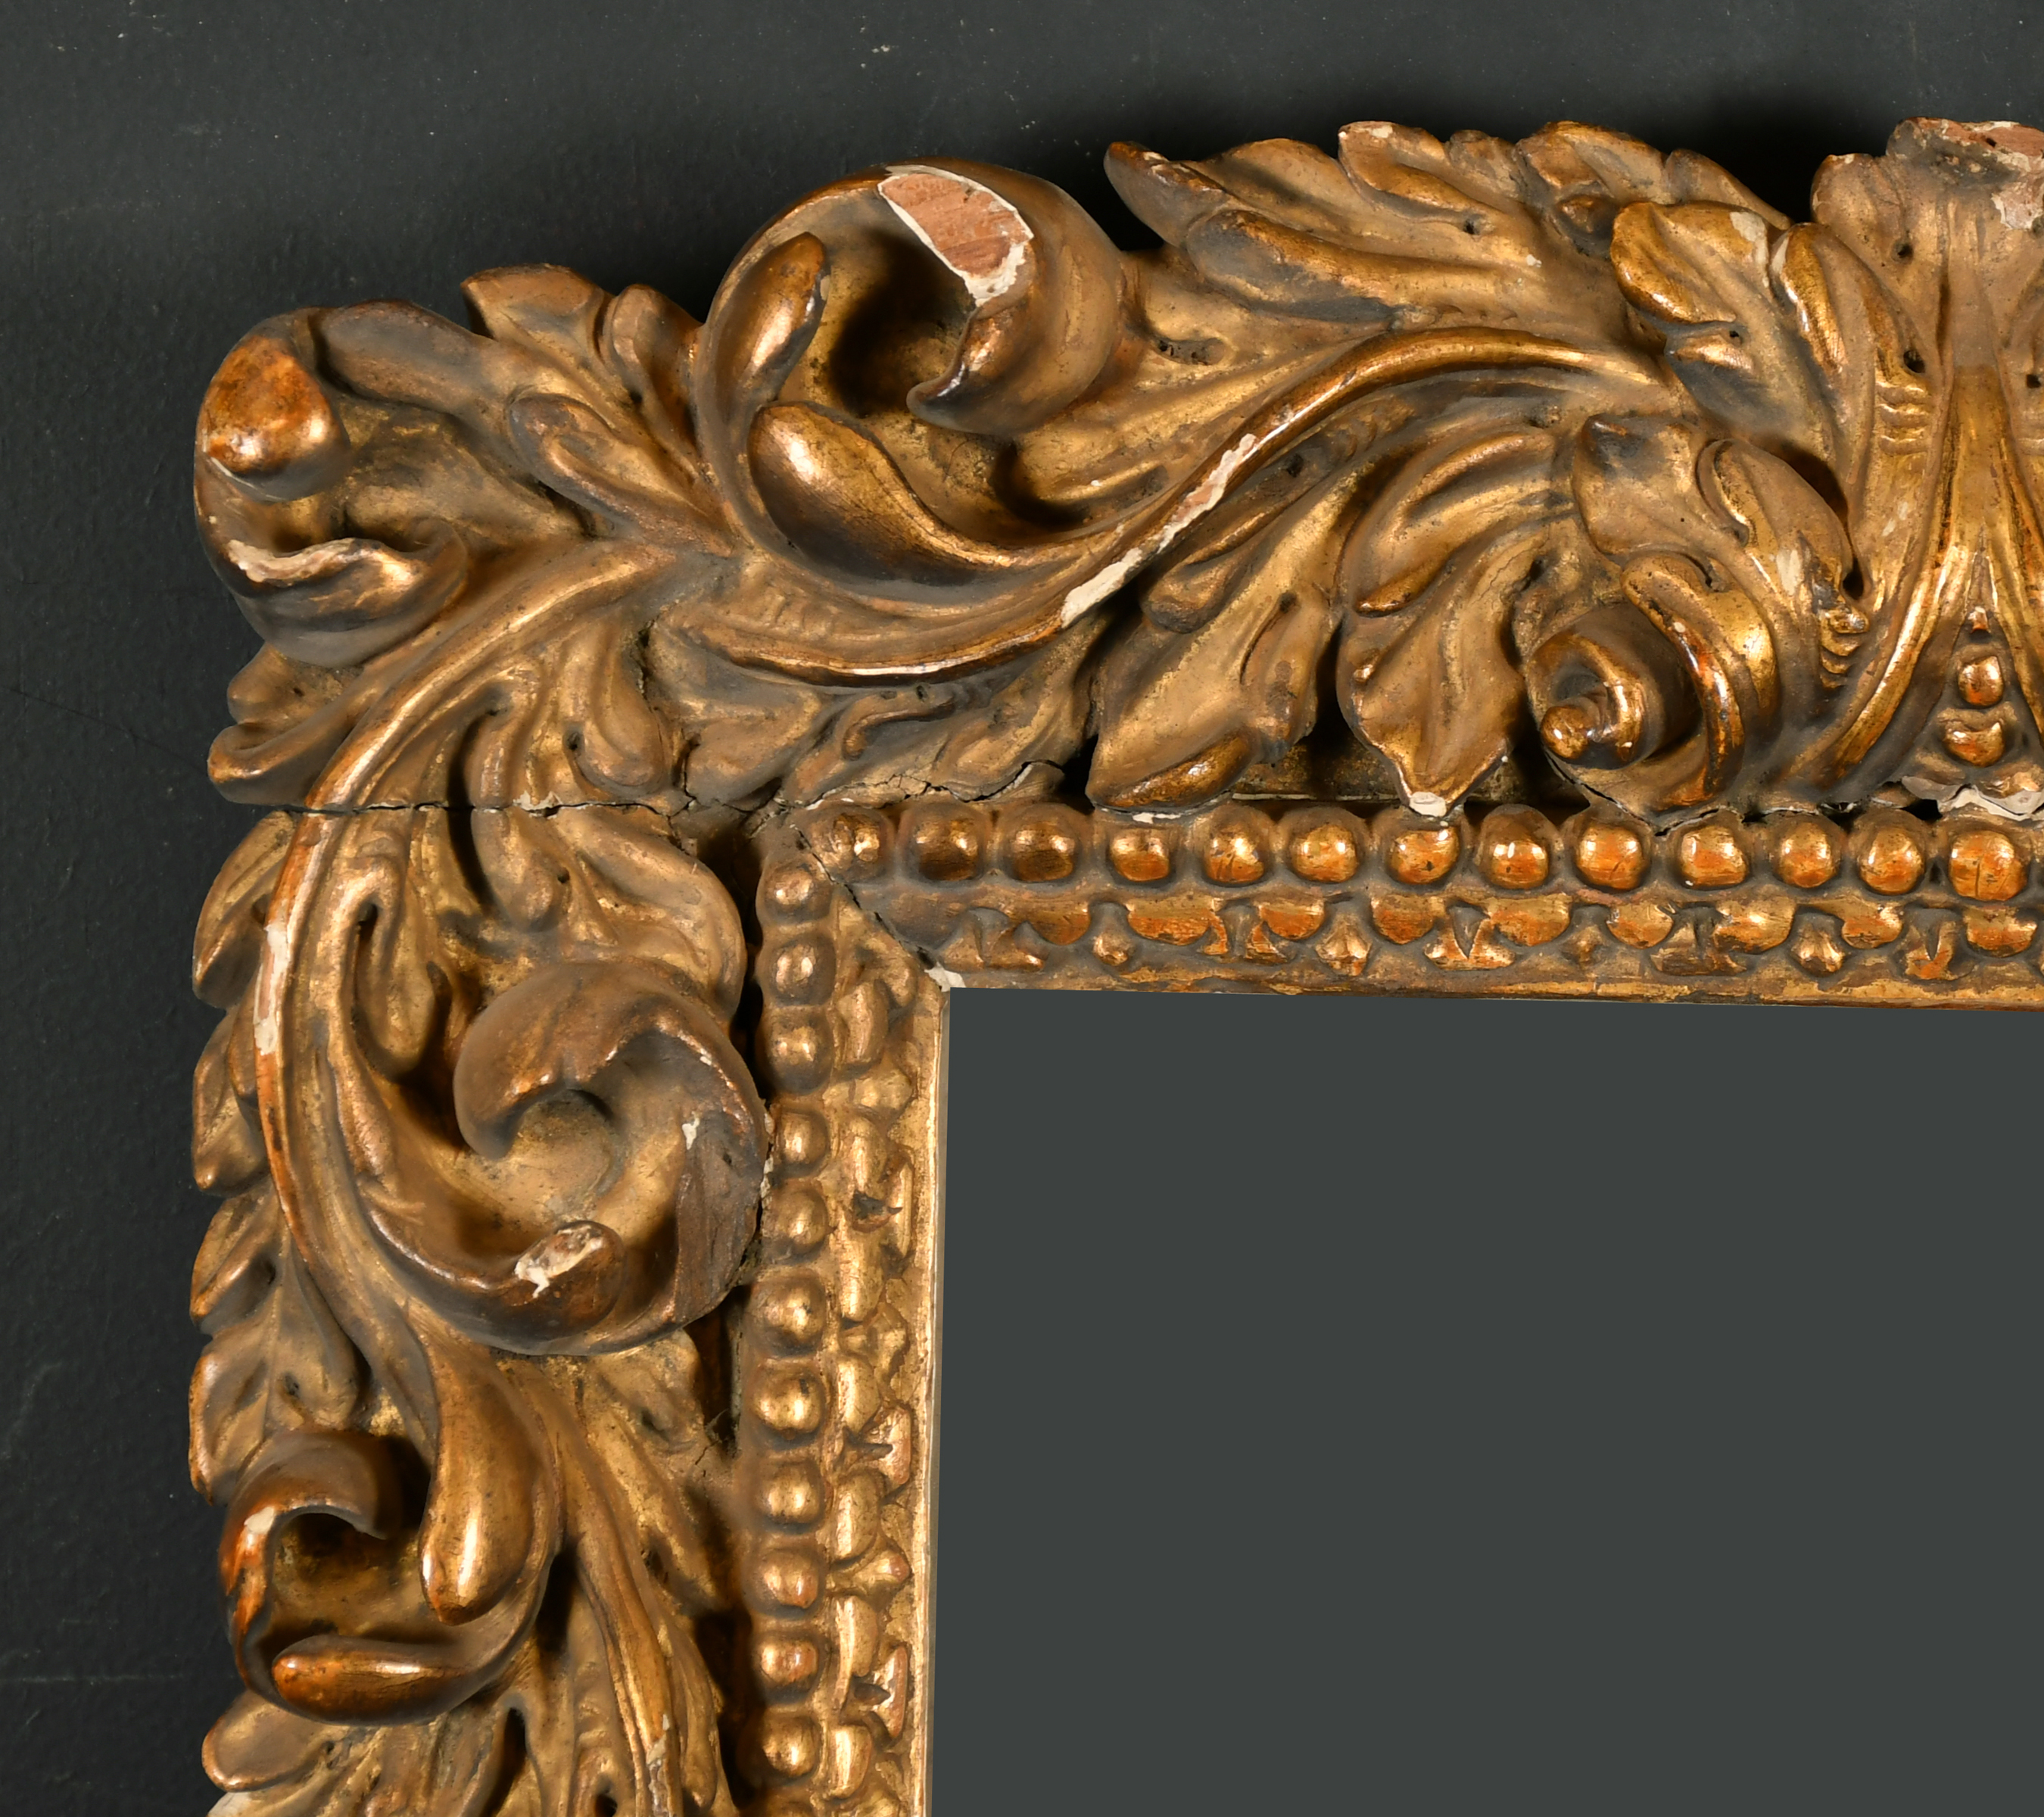 19th Century European School. A Carved Giltwood Frame, with inset mirror glass, rebate 10.75" x 8.